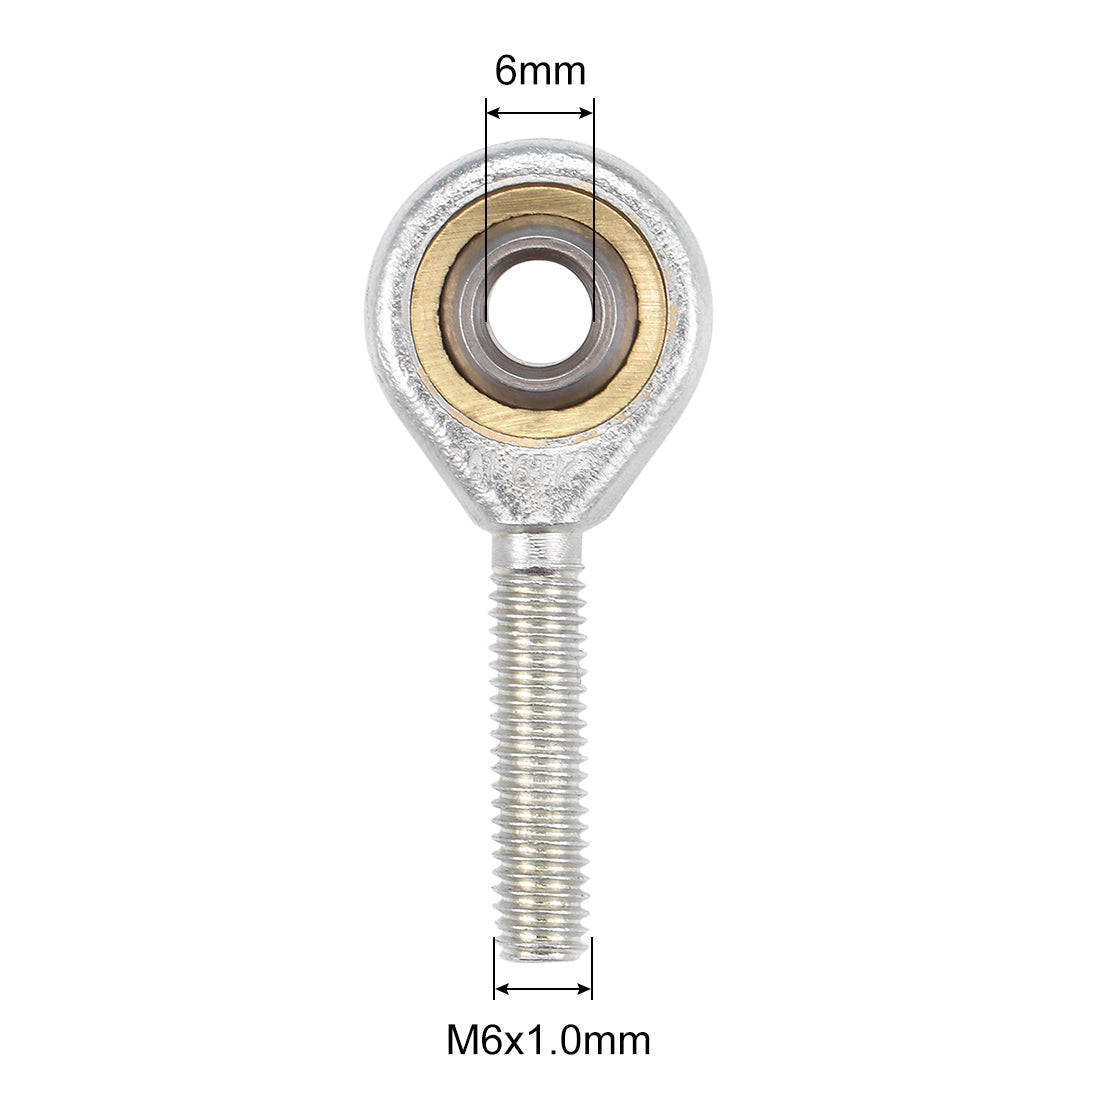 uxcell Uxcell 6mm Rod End Bearing M6x1.0 Rod Ends Ball Joint Male Left Hand Thread